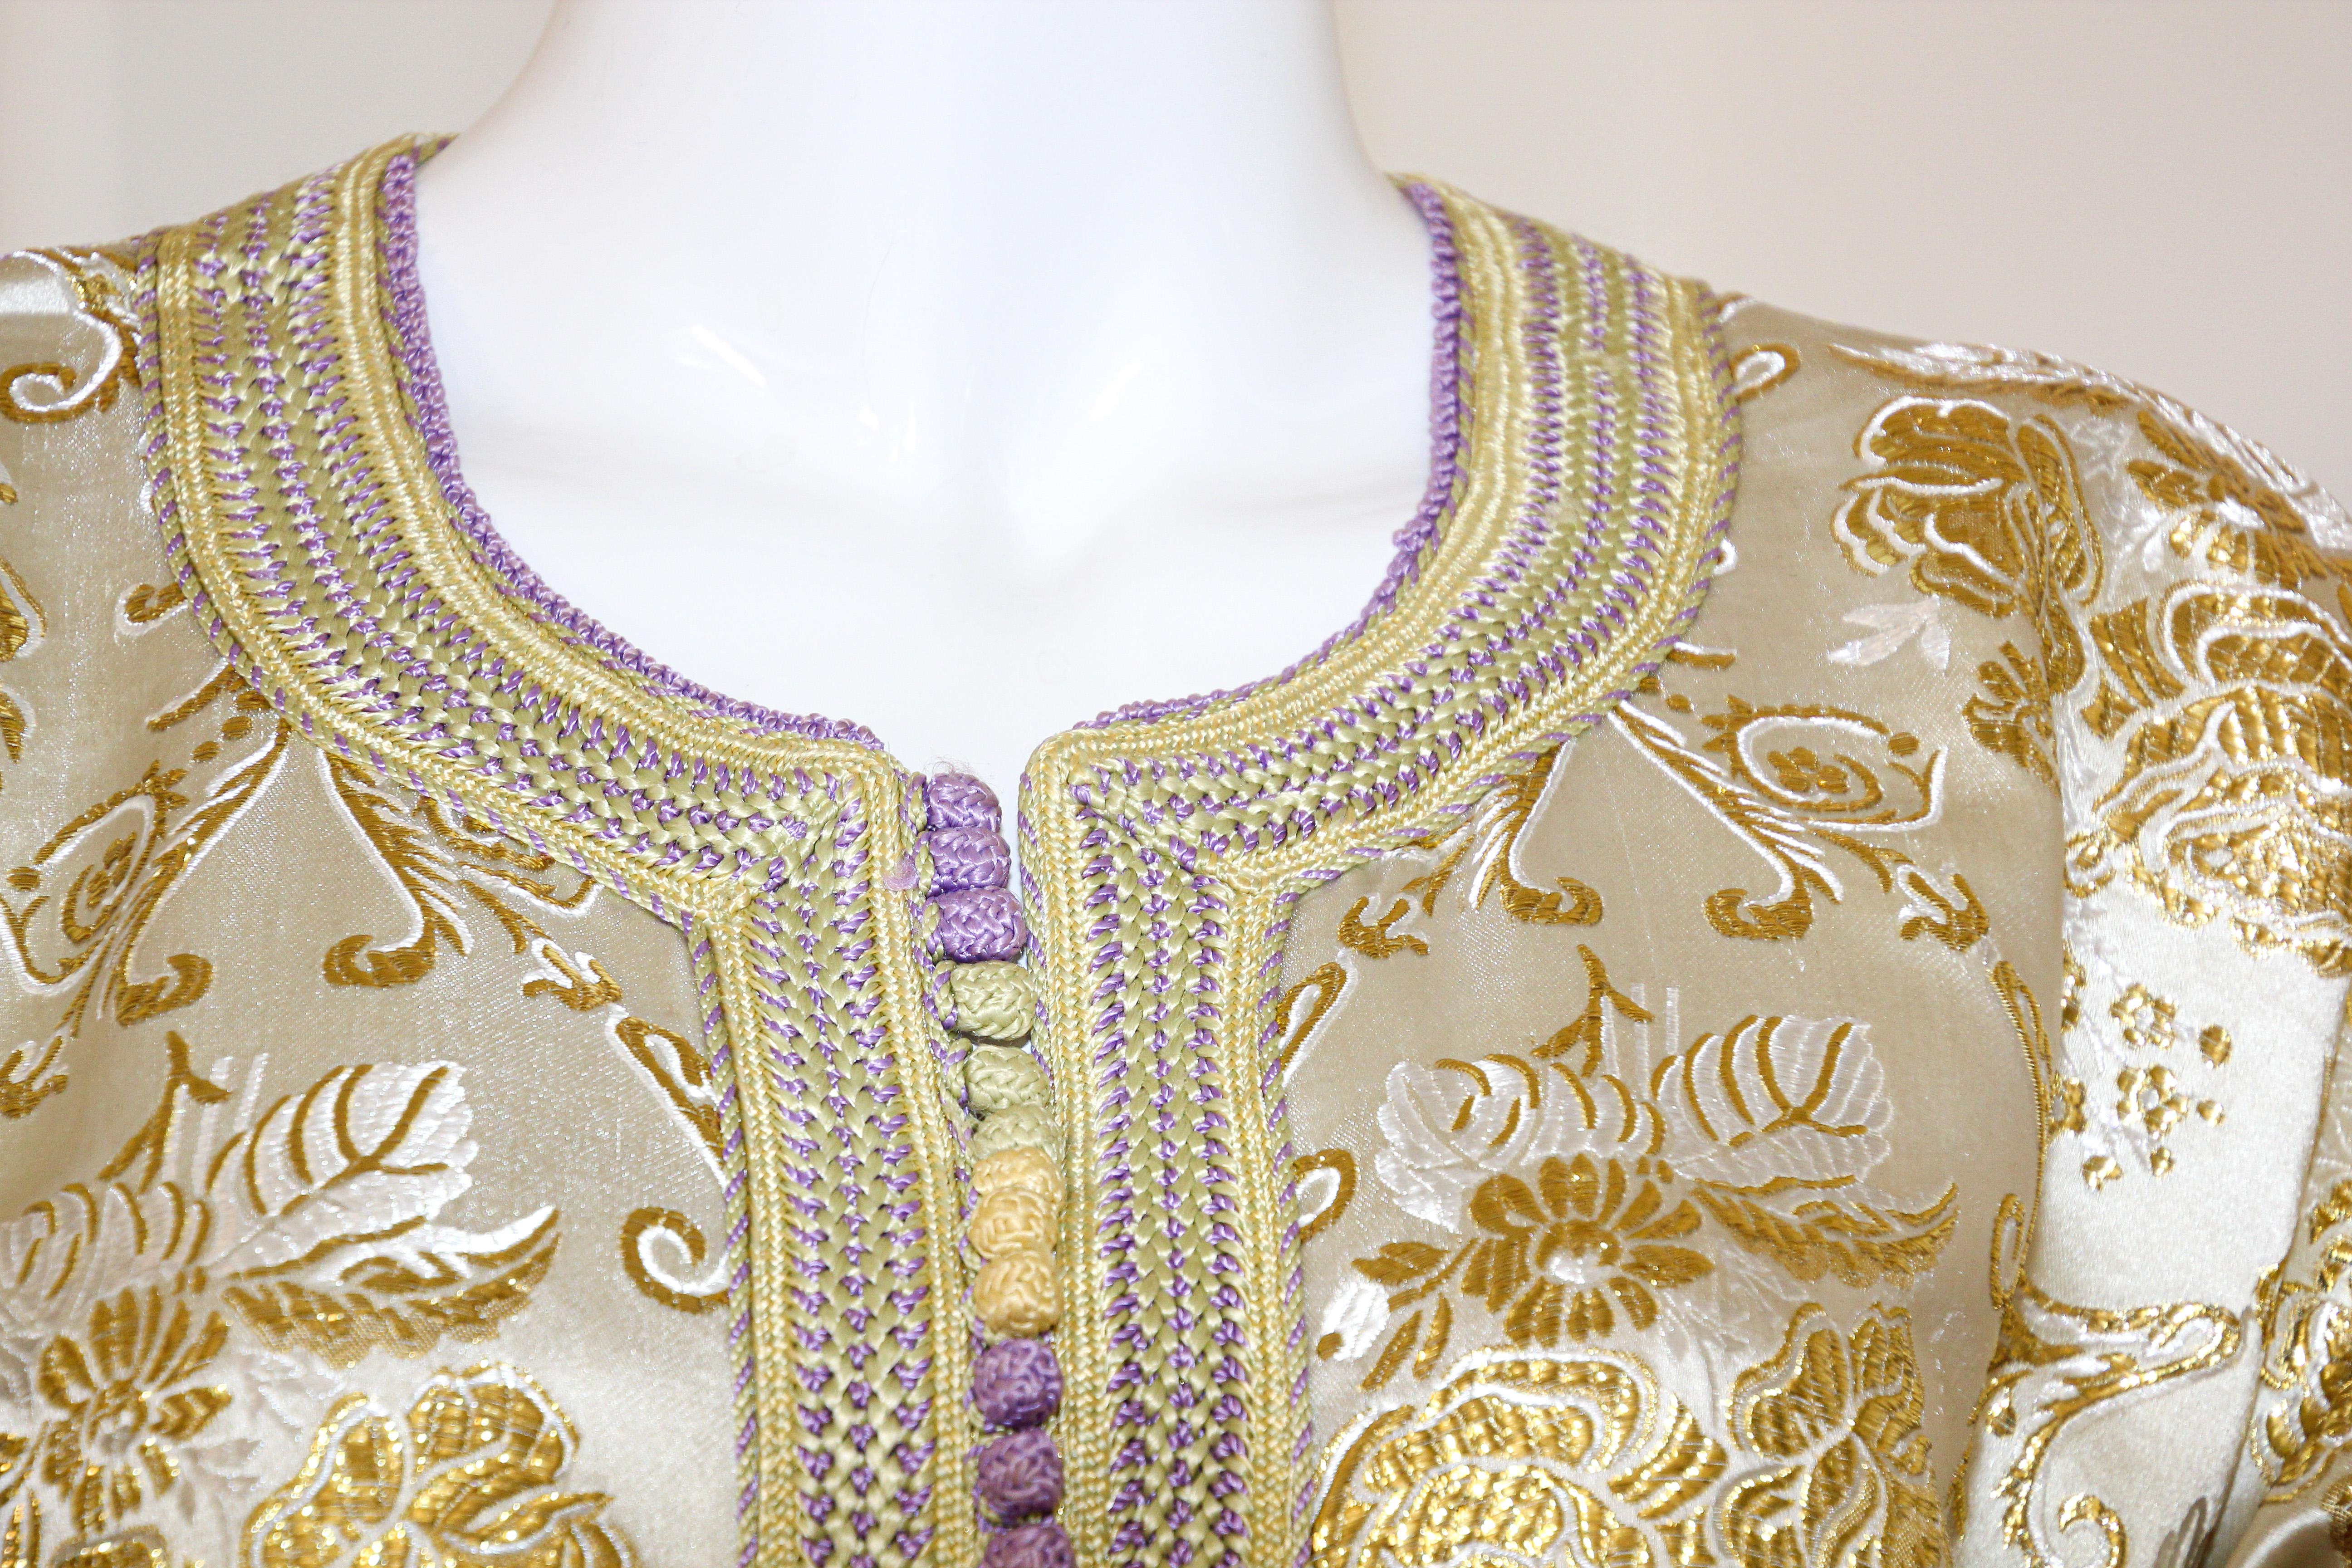 Hand-Crafted Moroccan Vintage Caftan in Gold Metallic Brocade, Maxi Gown Dress Kaftan For Sale